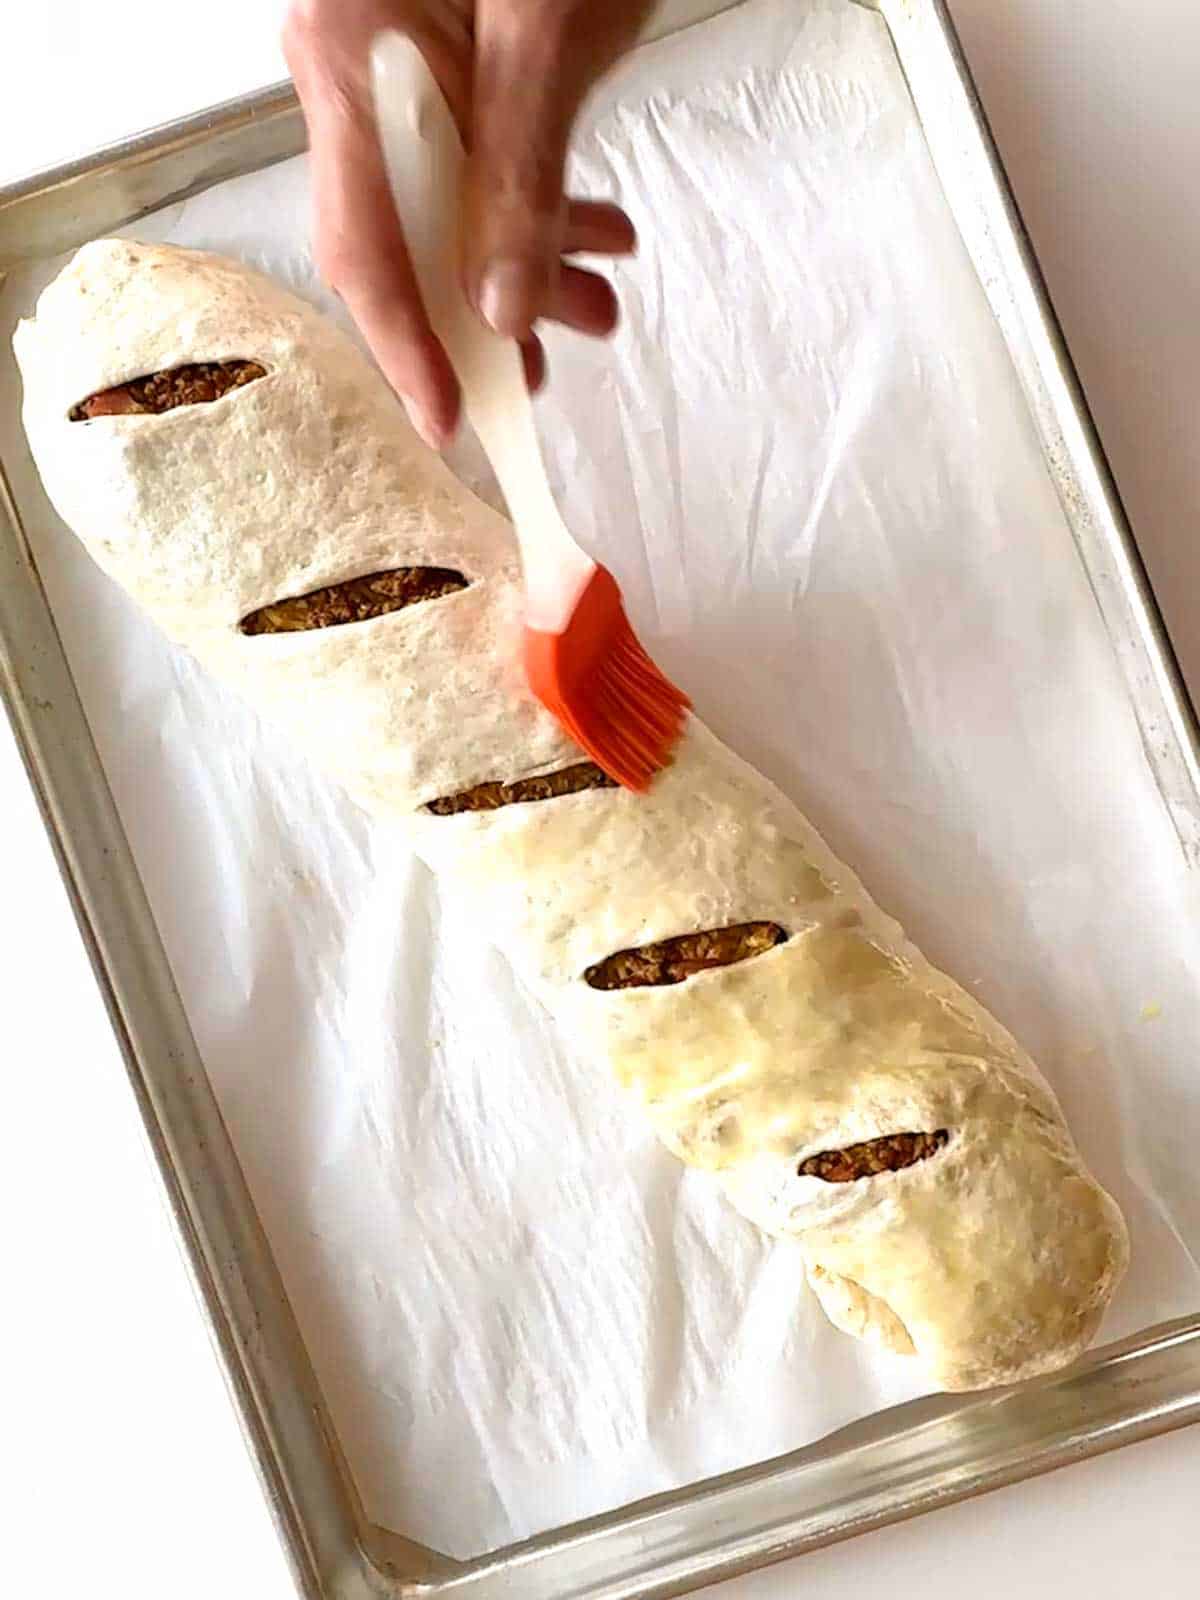 Brushing taco bread with egg wash prior to baking it.